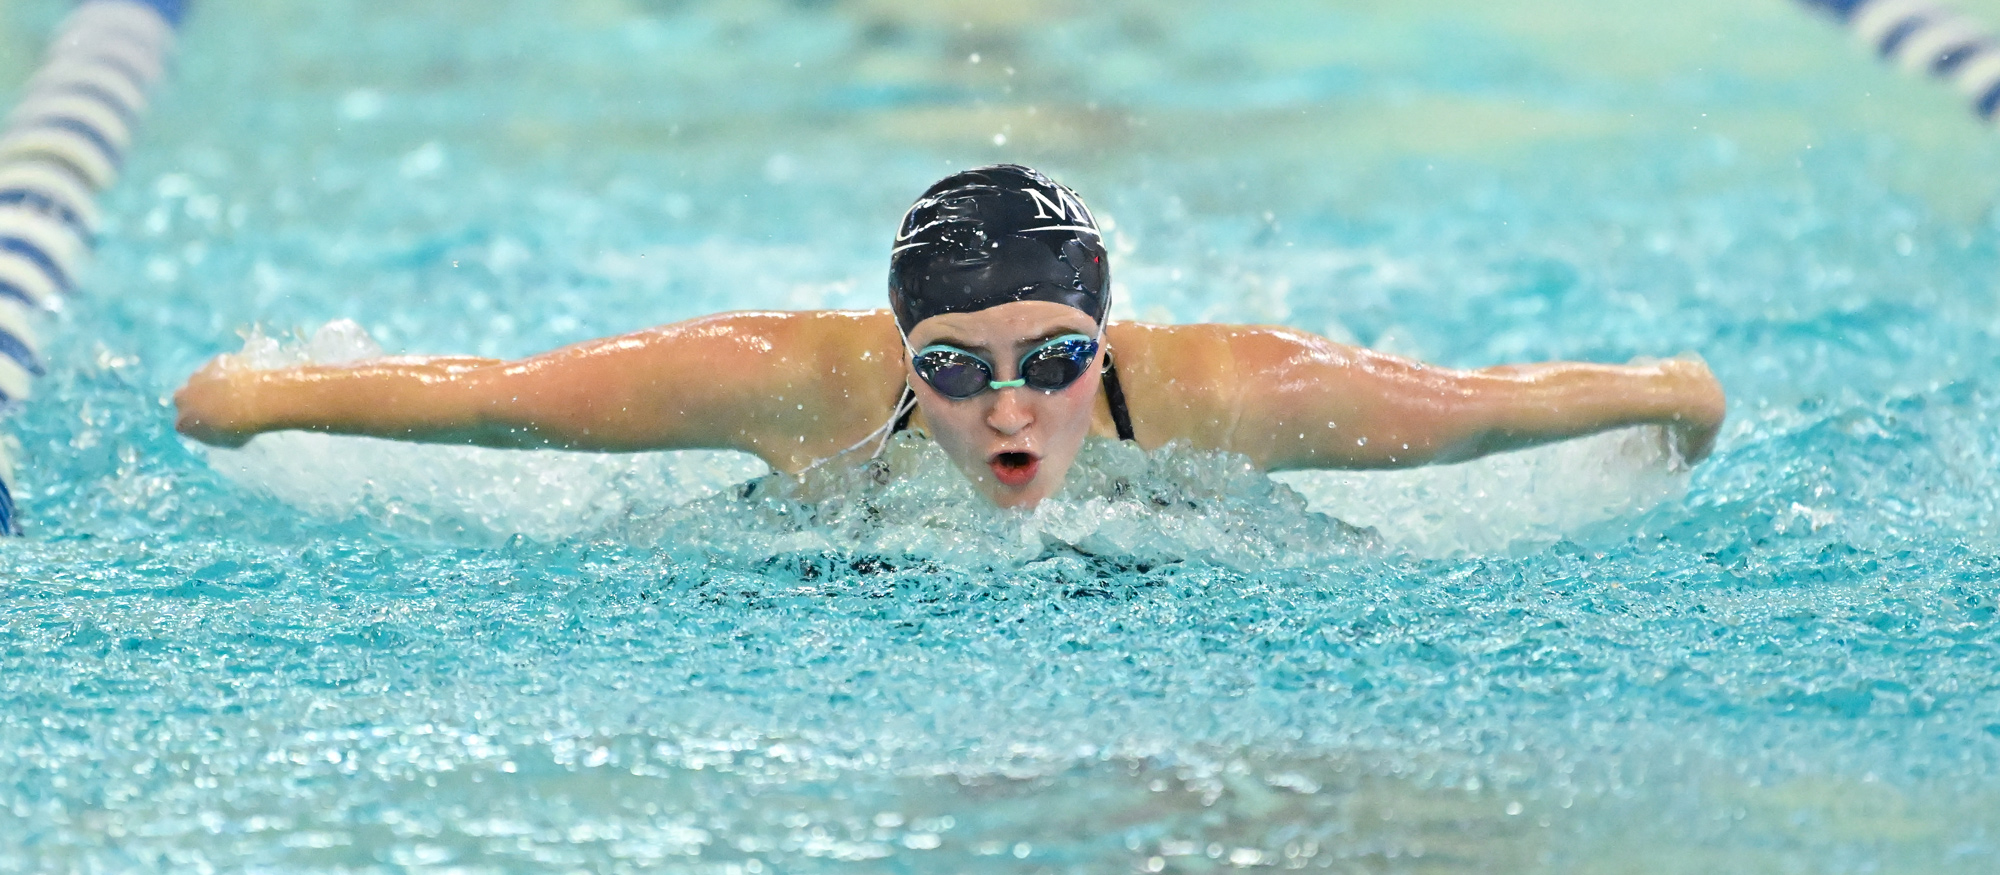 Mount Holyoke first-year Isabel Dunn placed 15th in the 100-yard butterfly at the NEWMAC Swimming & Diving Championships at MIT on Feb. 24, 2024. (RJB Sports file photo)